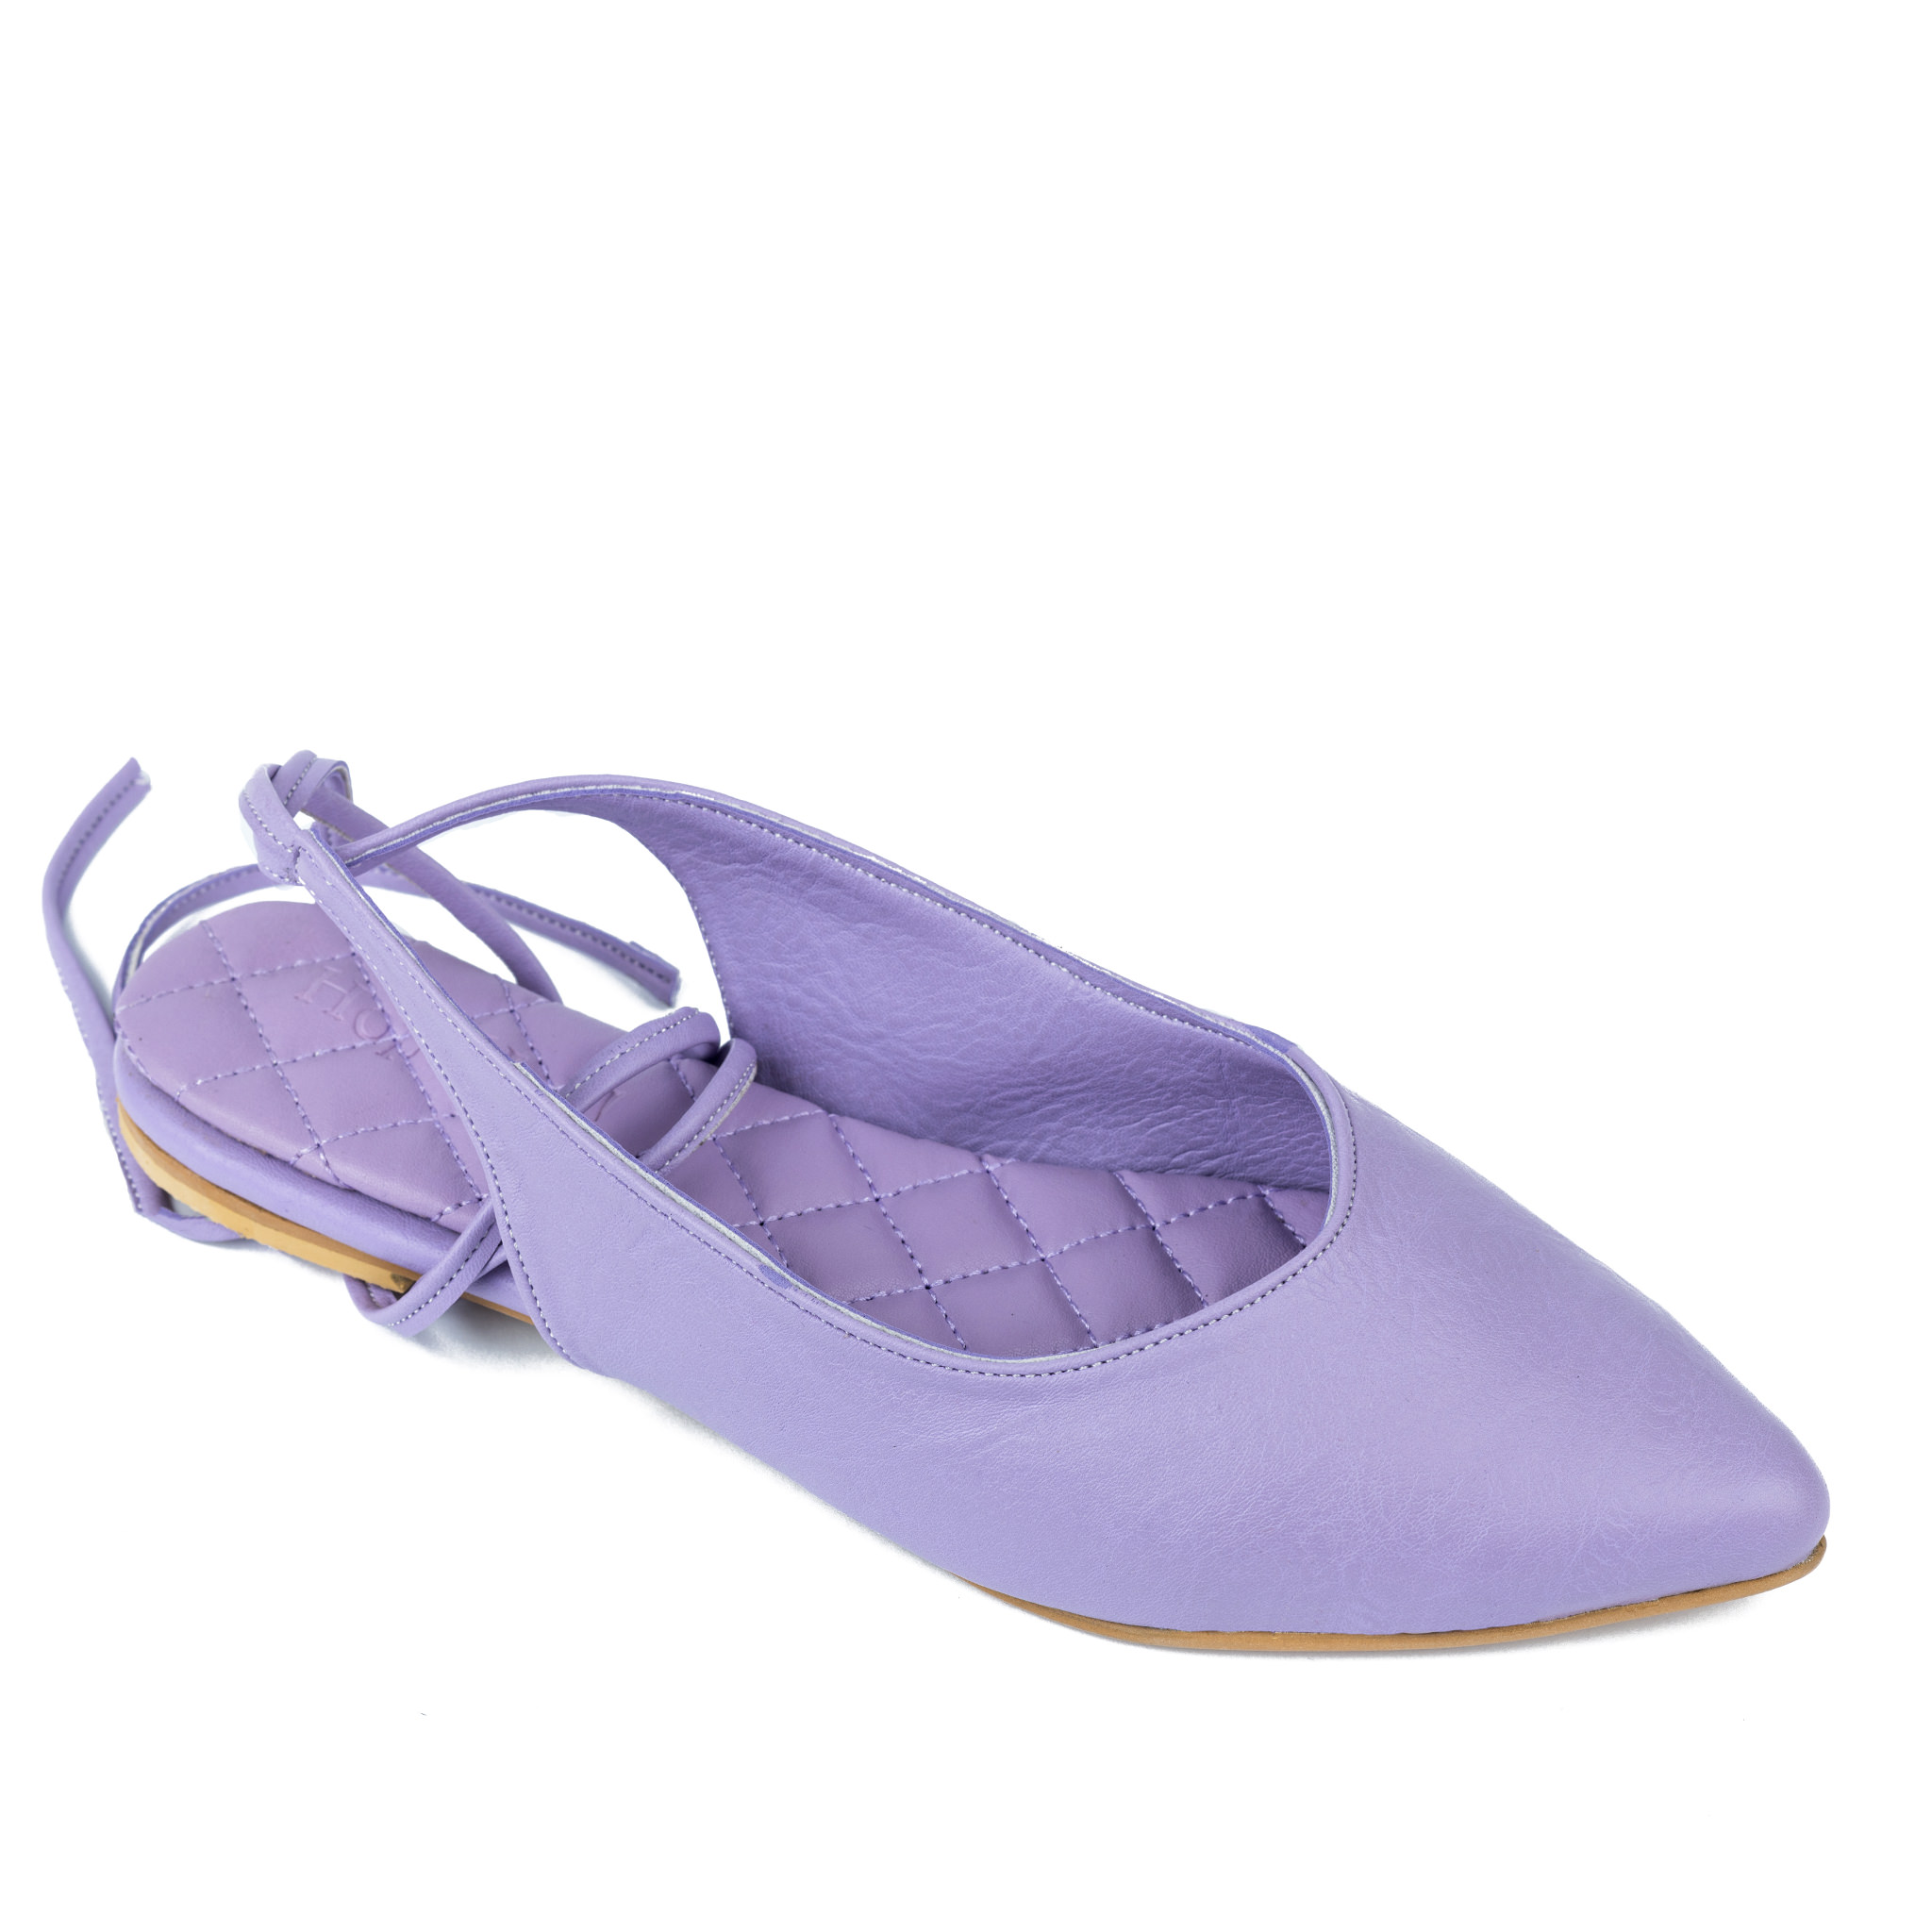 POINTED LACE UP SANDALS - PURPLE